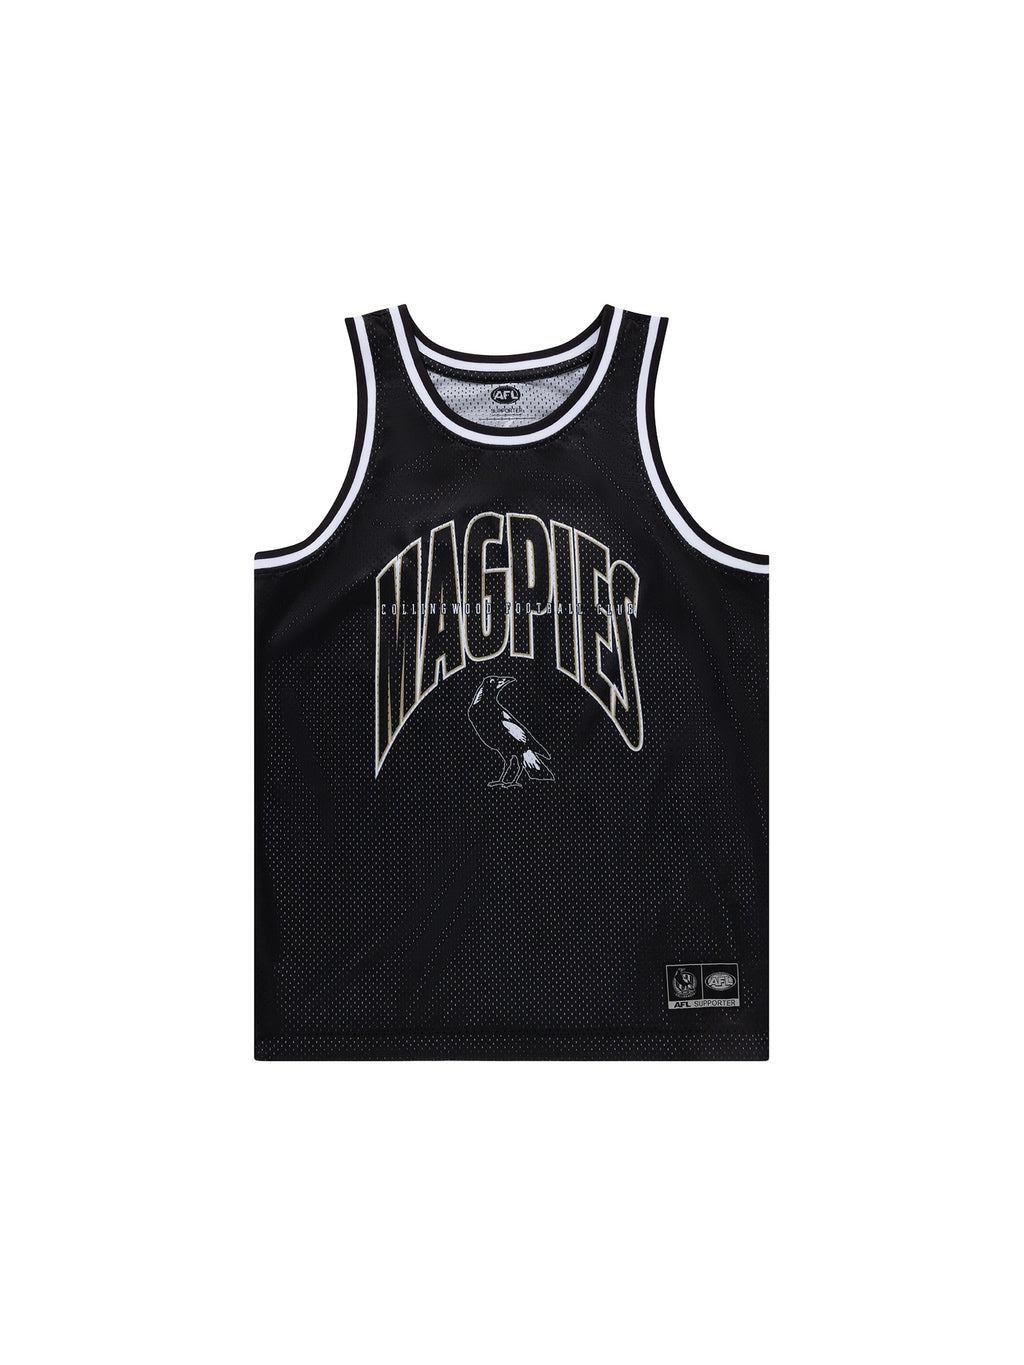 Collingwood Magpies Basketball Singlet